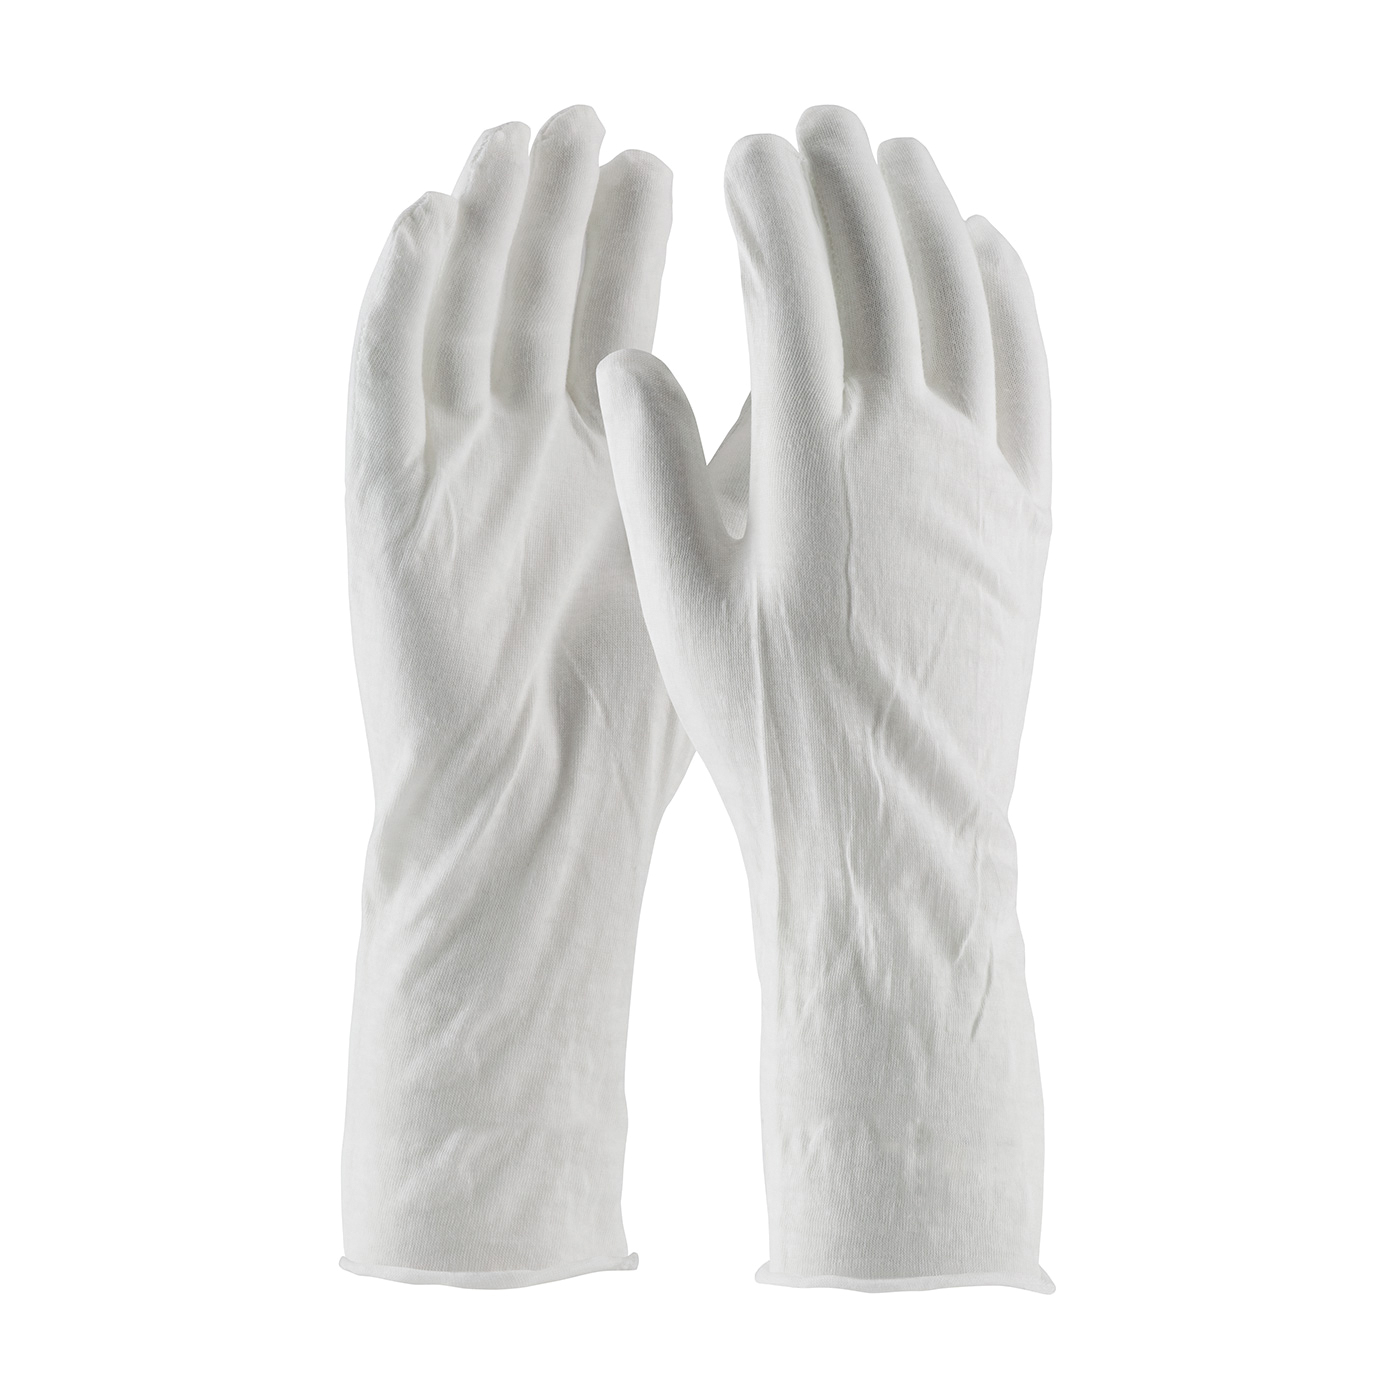 PIP® CleanTeam® 97-520/14 Medium Weight Men's Premium Grade Reversible Inspection Gloves, Universal, Cotton, White, Seamless Style, Paired Hand, 14 in L